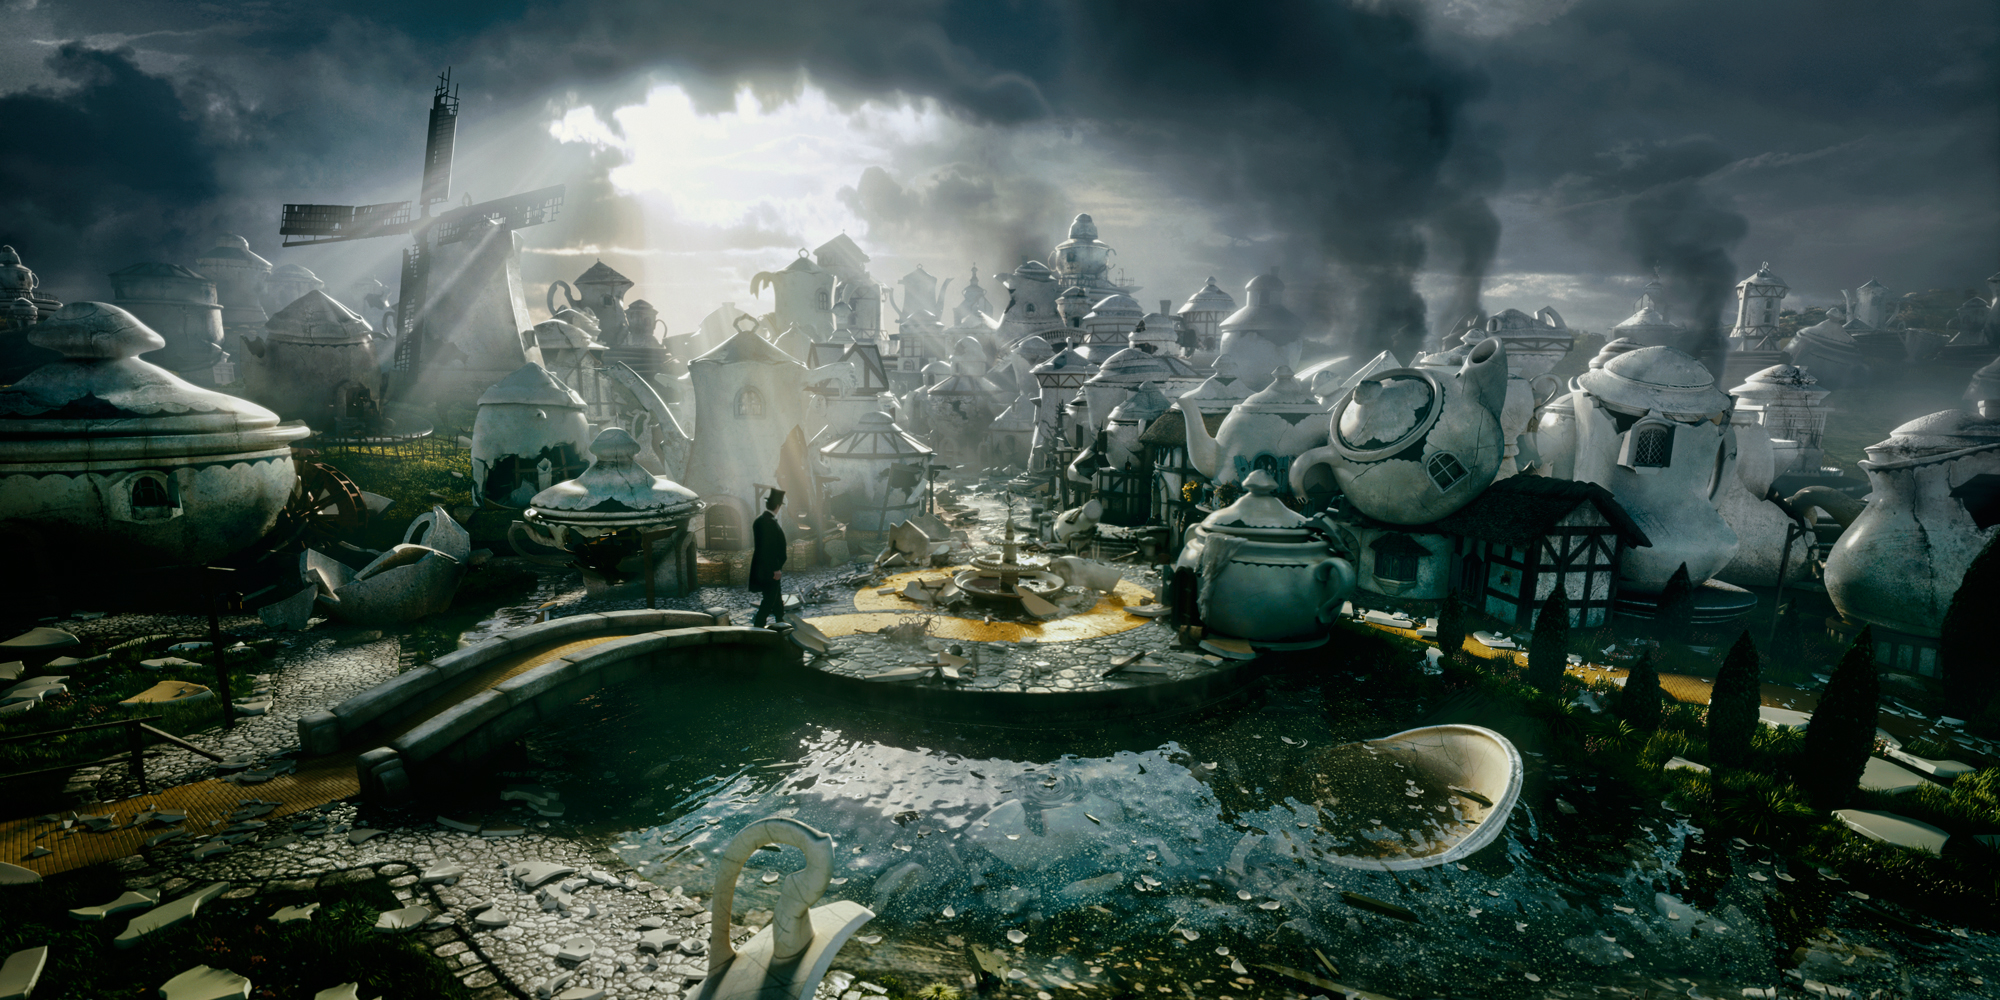 Movie Oz the Great and Powerful HD Wallpaper | Background Image